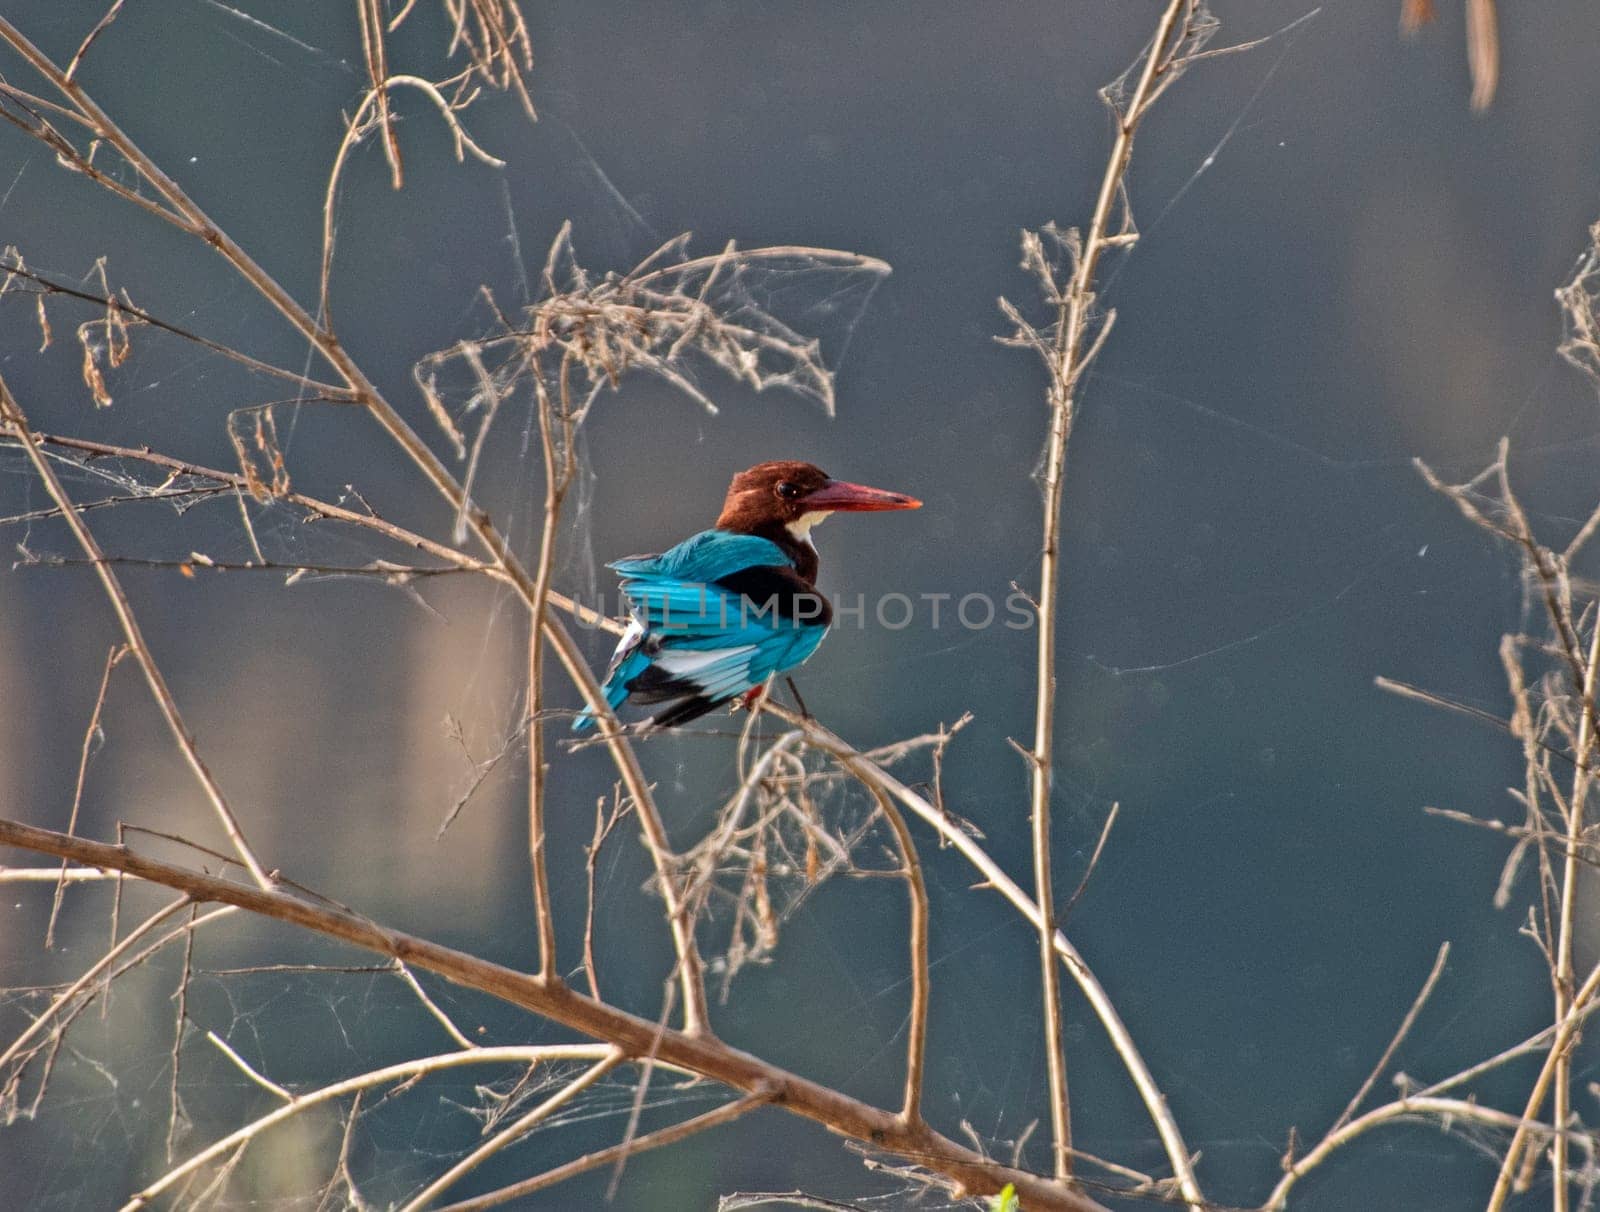 White-throated kingfisher perched on tree branch by paulvinten